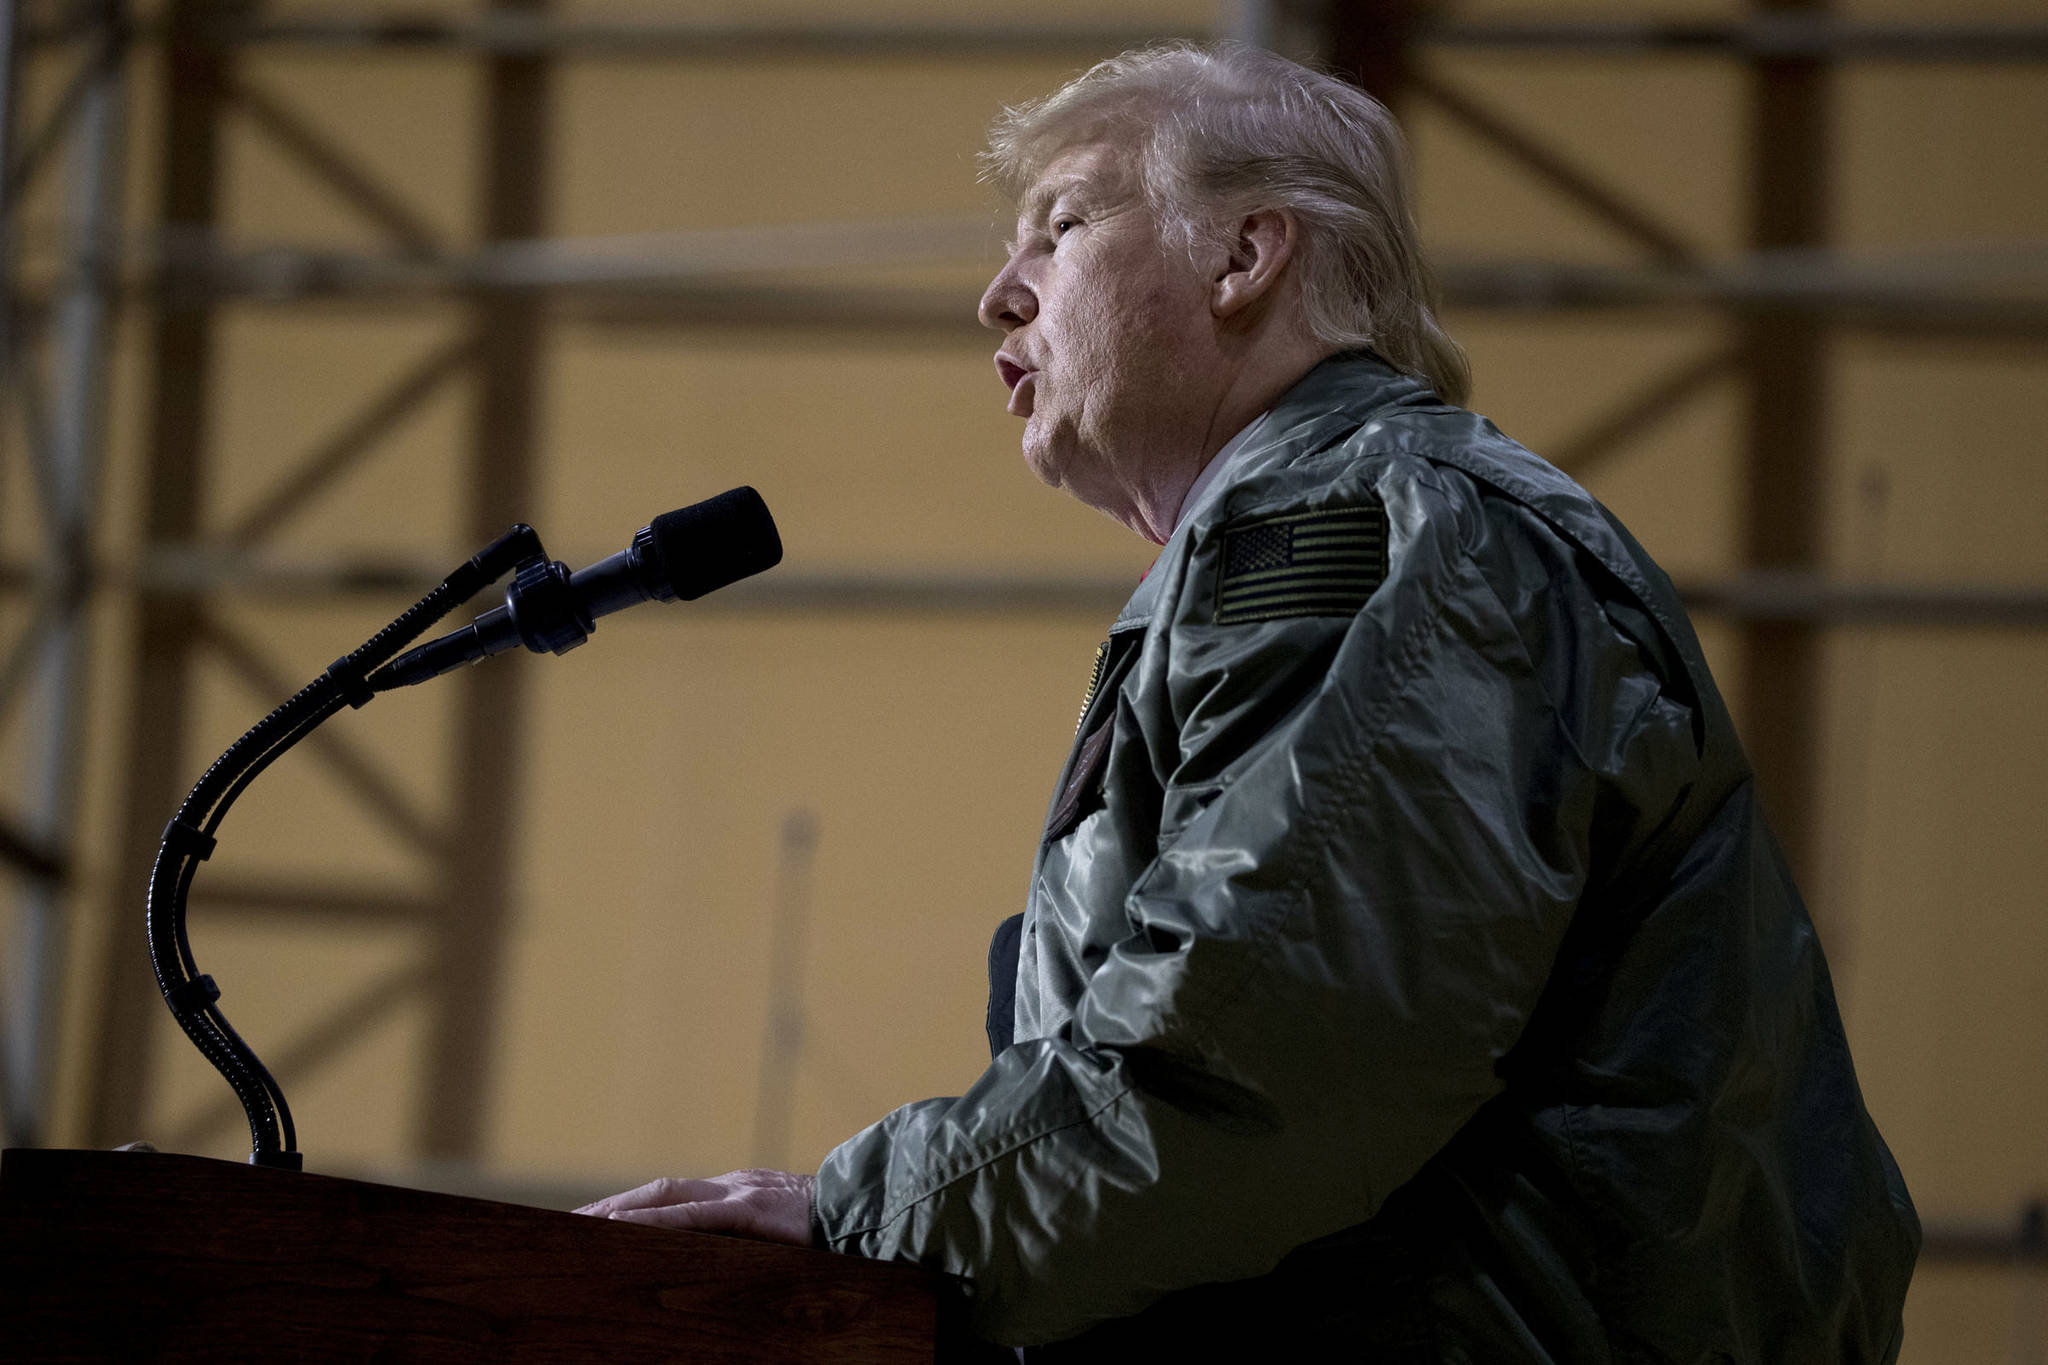 President Donald Trump speaks at a hanger rally at Al Asad Air Base, Iraq, Wednesday, Dec. 26, 2018. In a surprise trip to Iraq, President Donald Trump on Wednesday defended his decision to withdraw U.S. forces from Syria where they have been helping battle Islamic State militants. (Andrew Harnik | Associated Press)